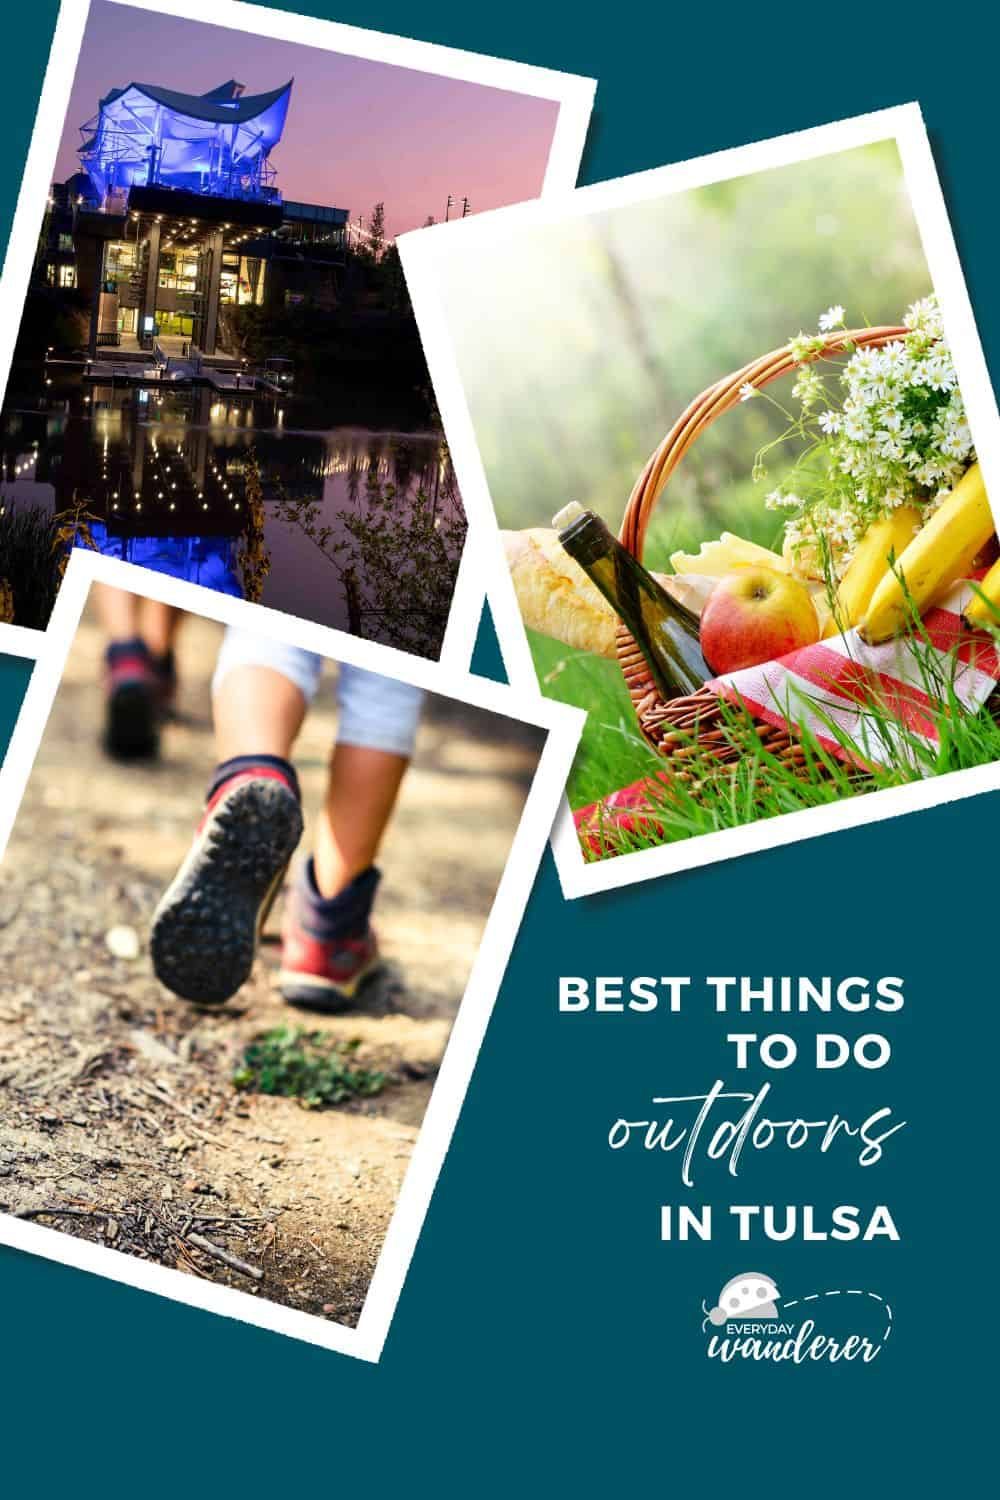 Best Things to Do Outdoors in Tulsa - Pin 1 - JPG